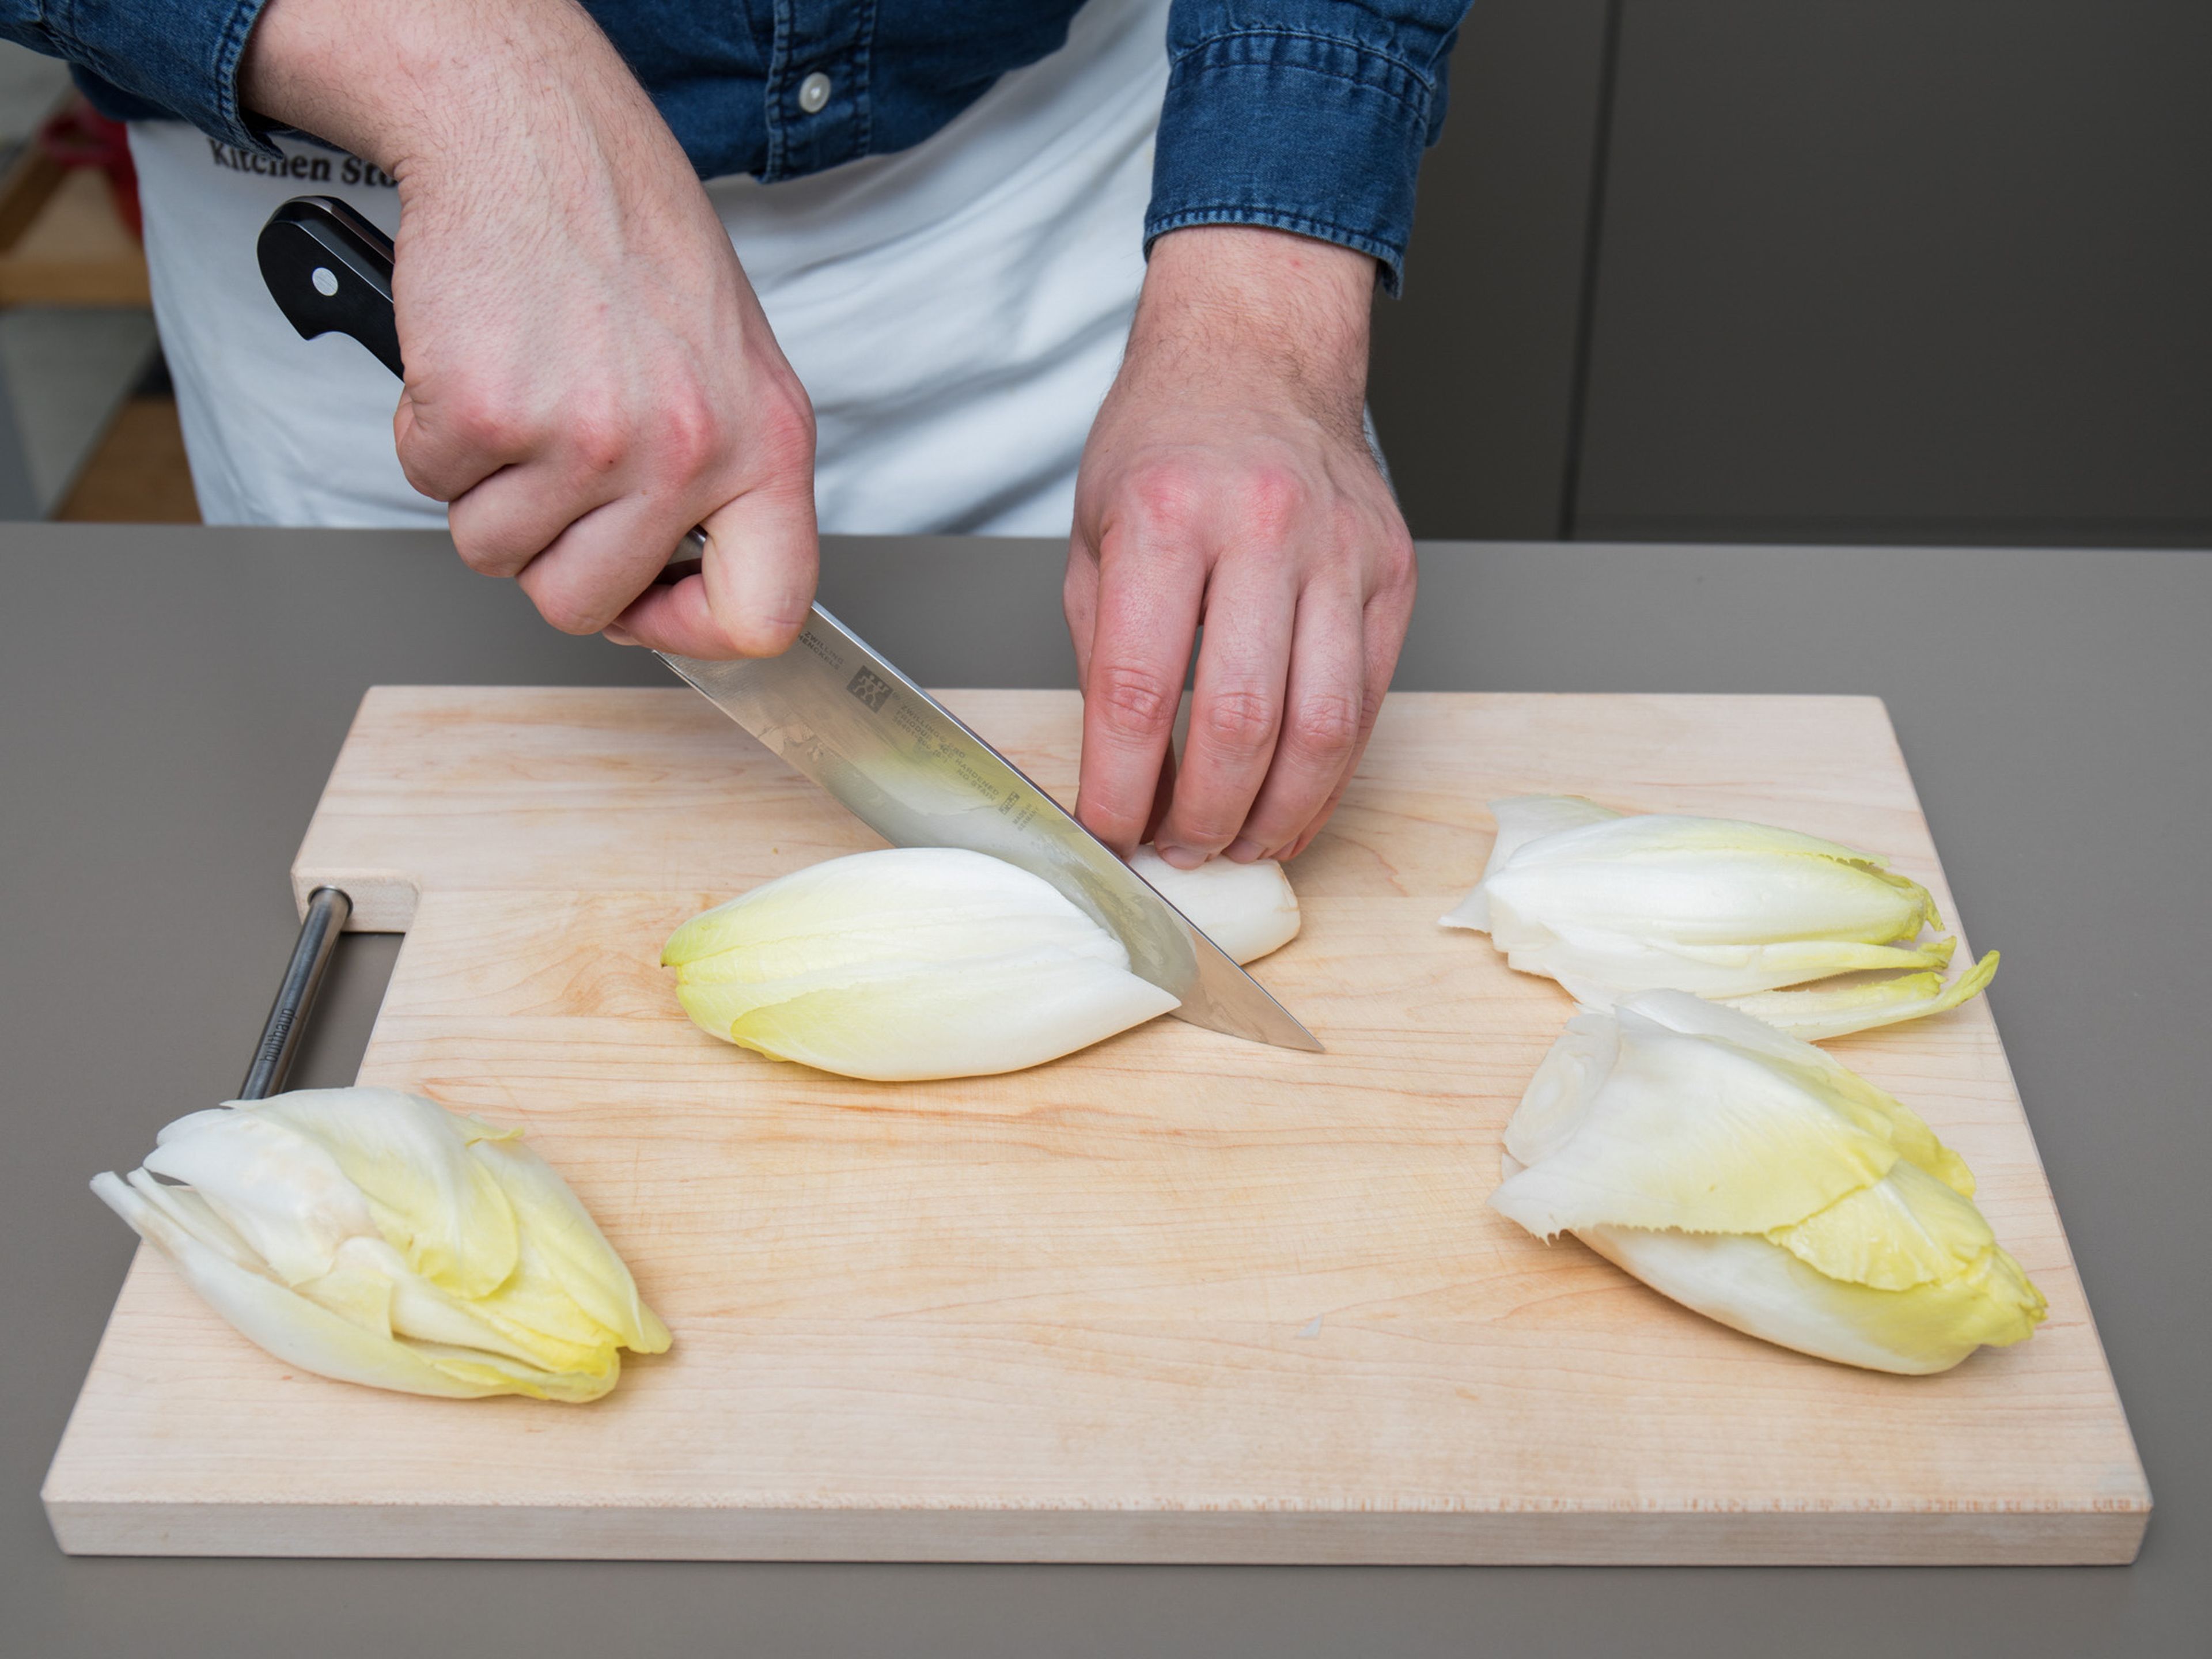 Remove the outer leaves of each endive, discarding any that are wilted or discolored. Then, slice in half lengthwise.